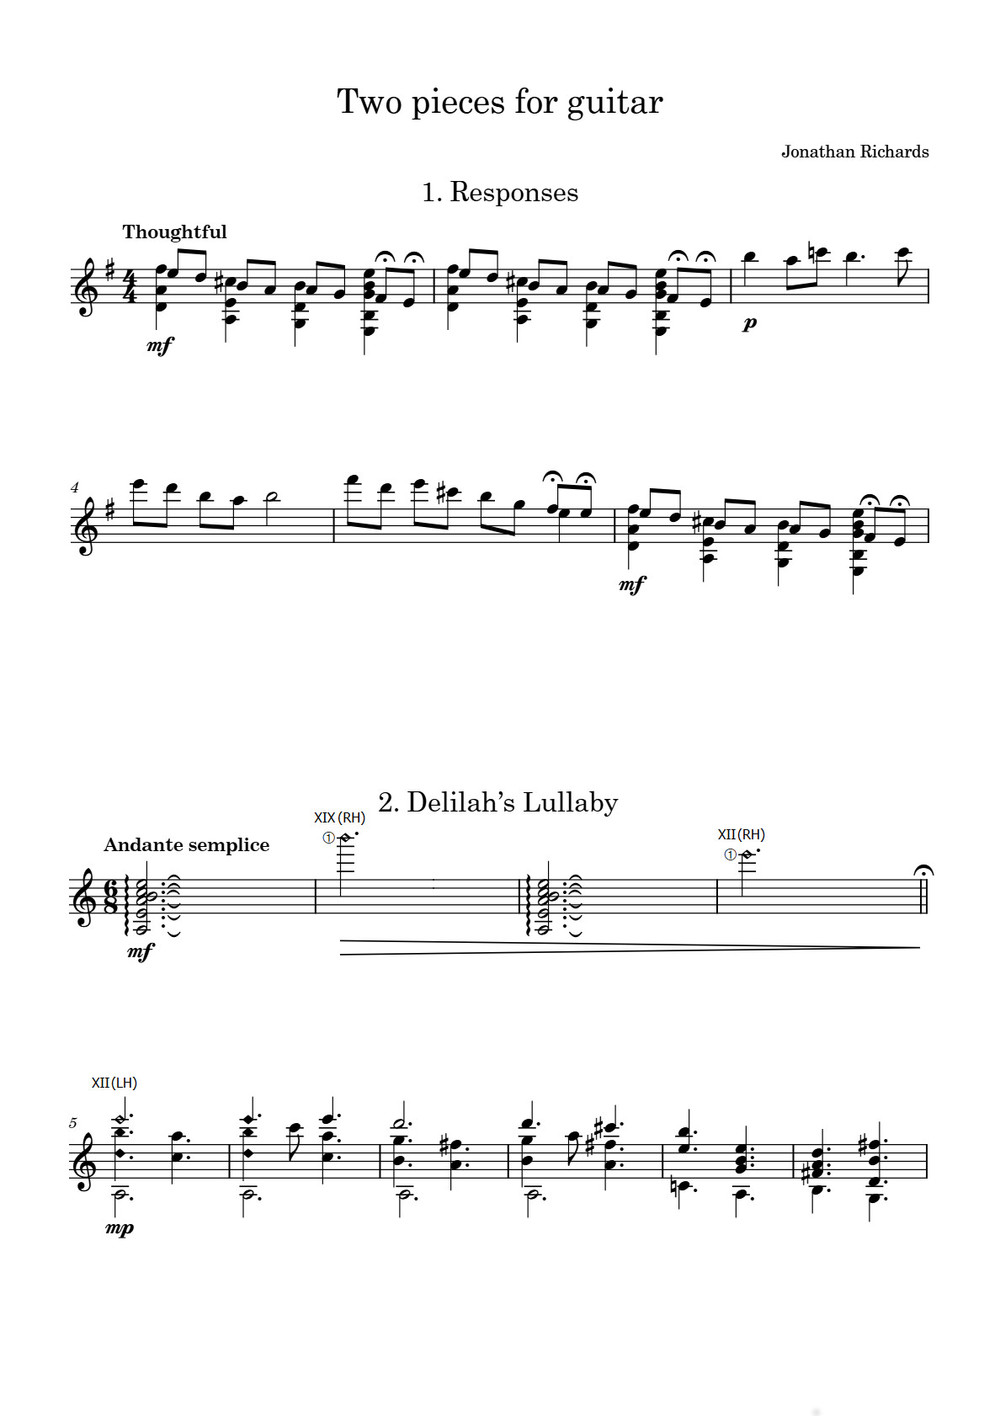 Two Pieces for Guitar - sample page